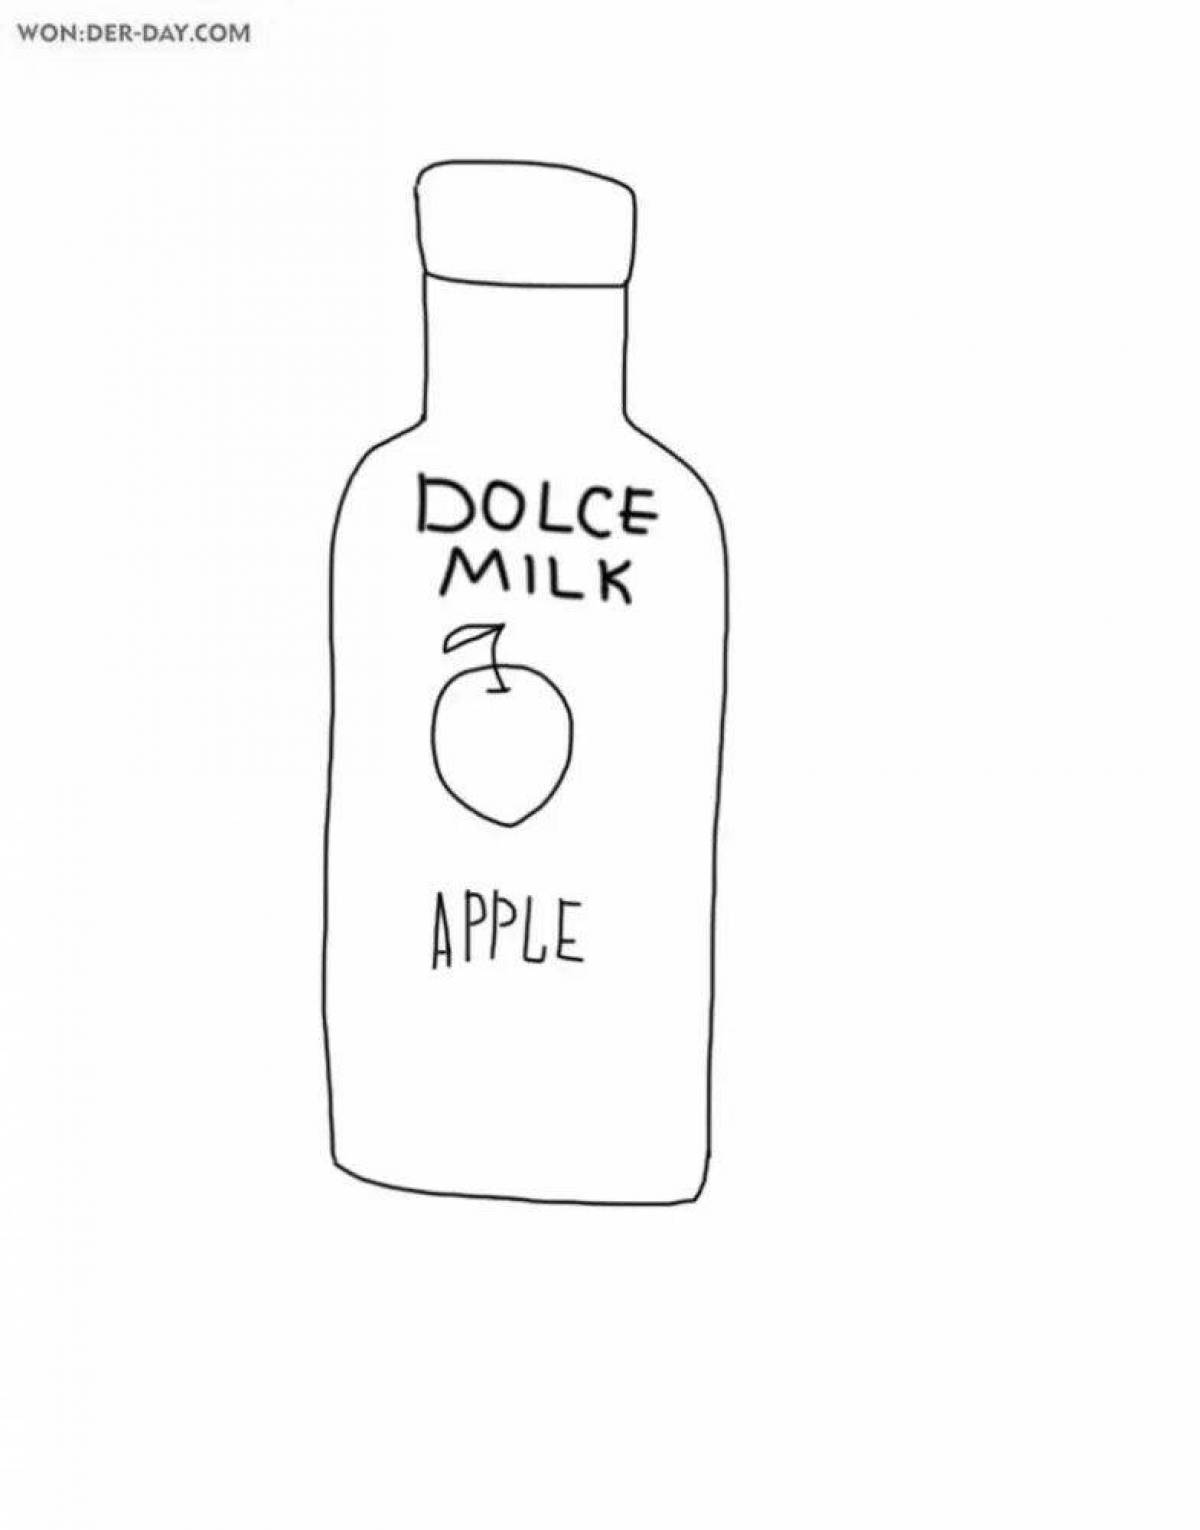 Amazing dolce milk antiseptic coloring page